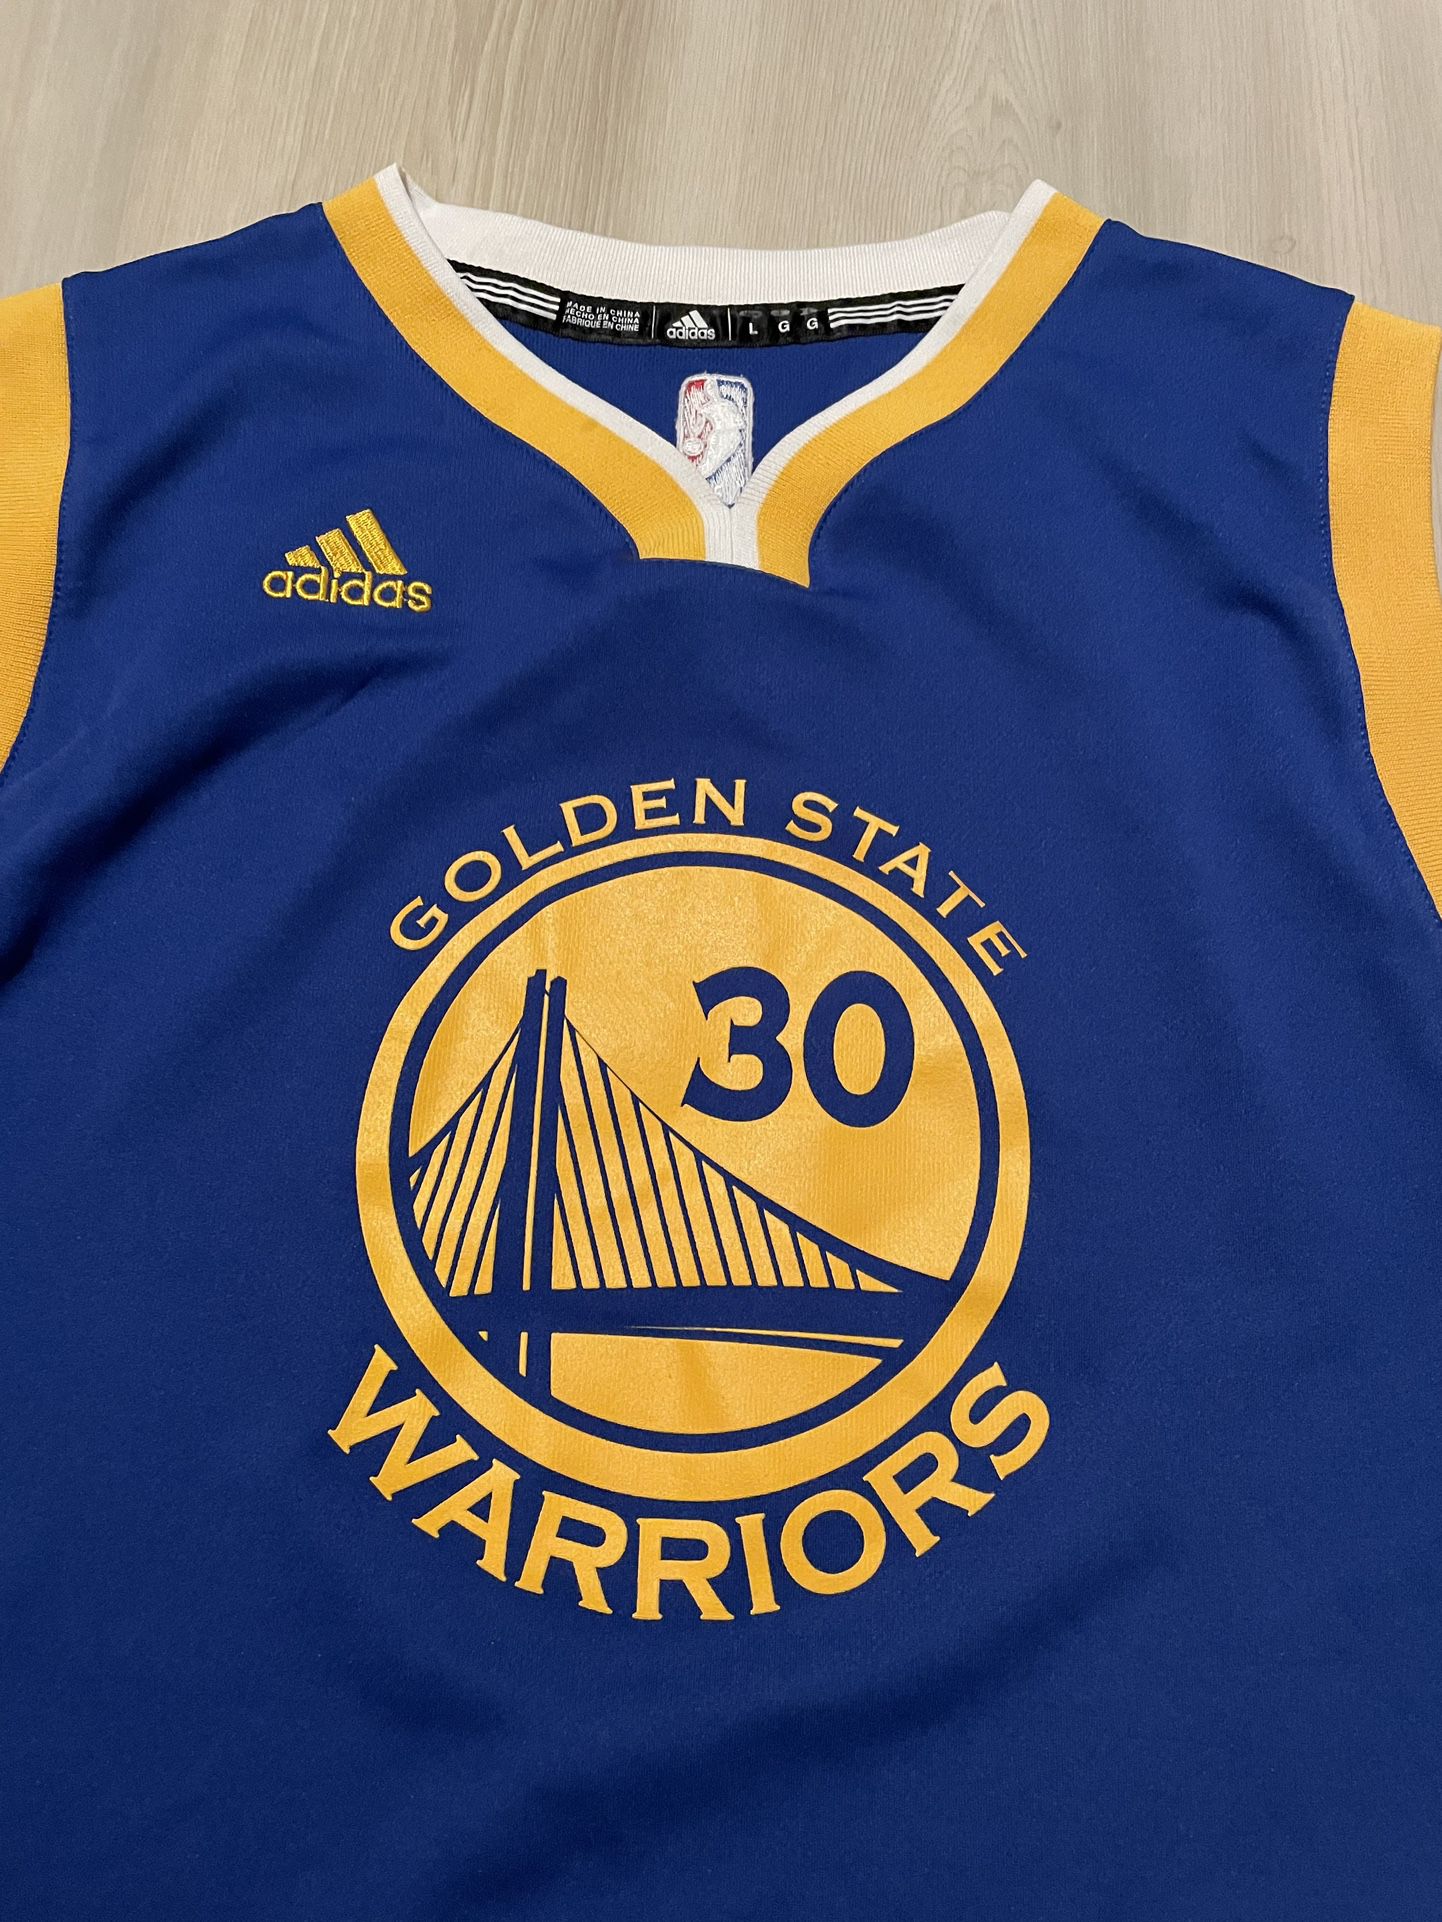 Steph Curry Golden State Warriors Adidas NBA Basketball Shirt - Kids Youth  Large